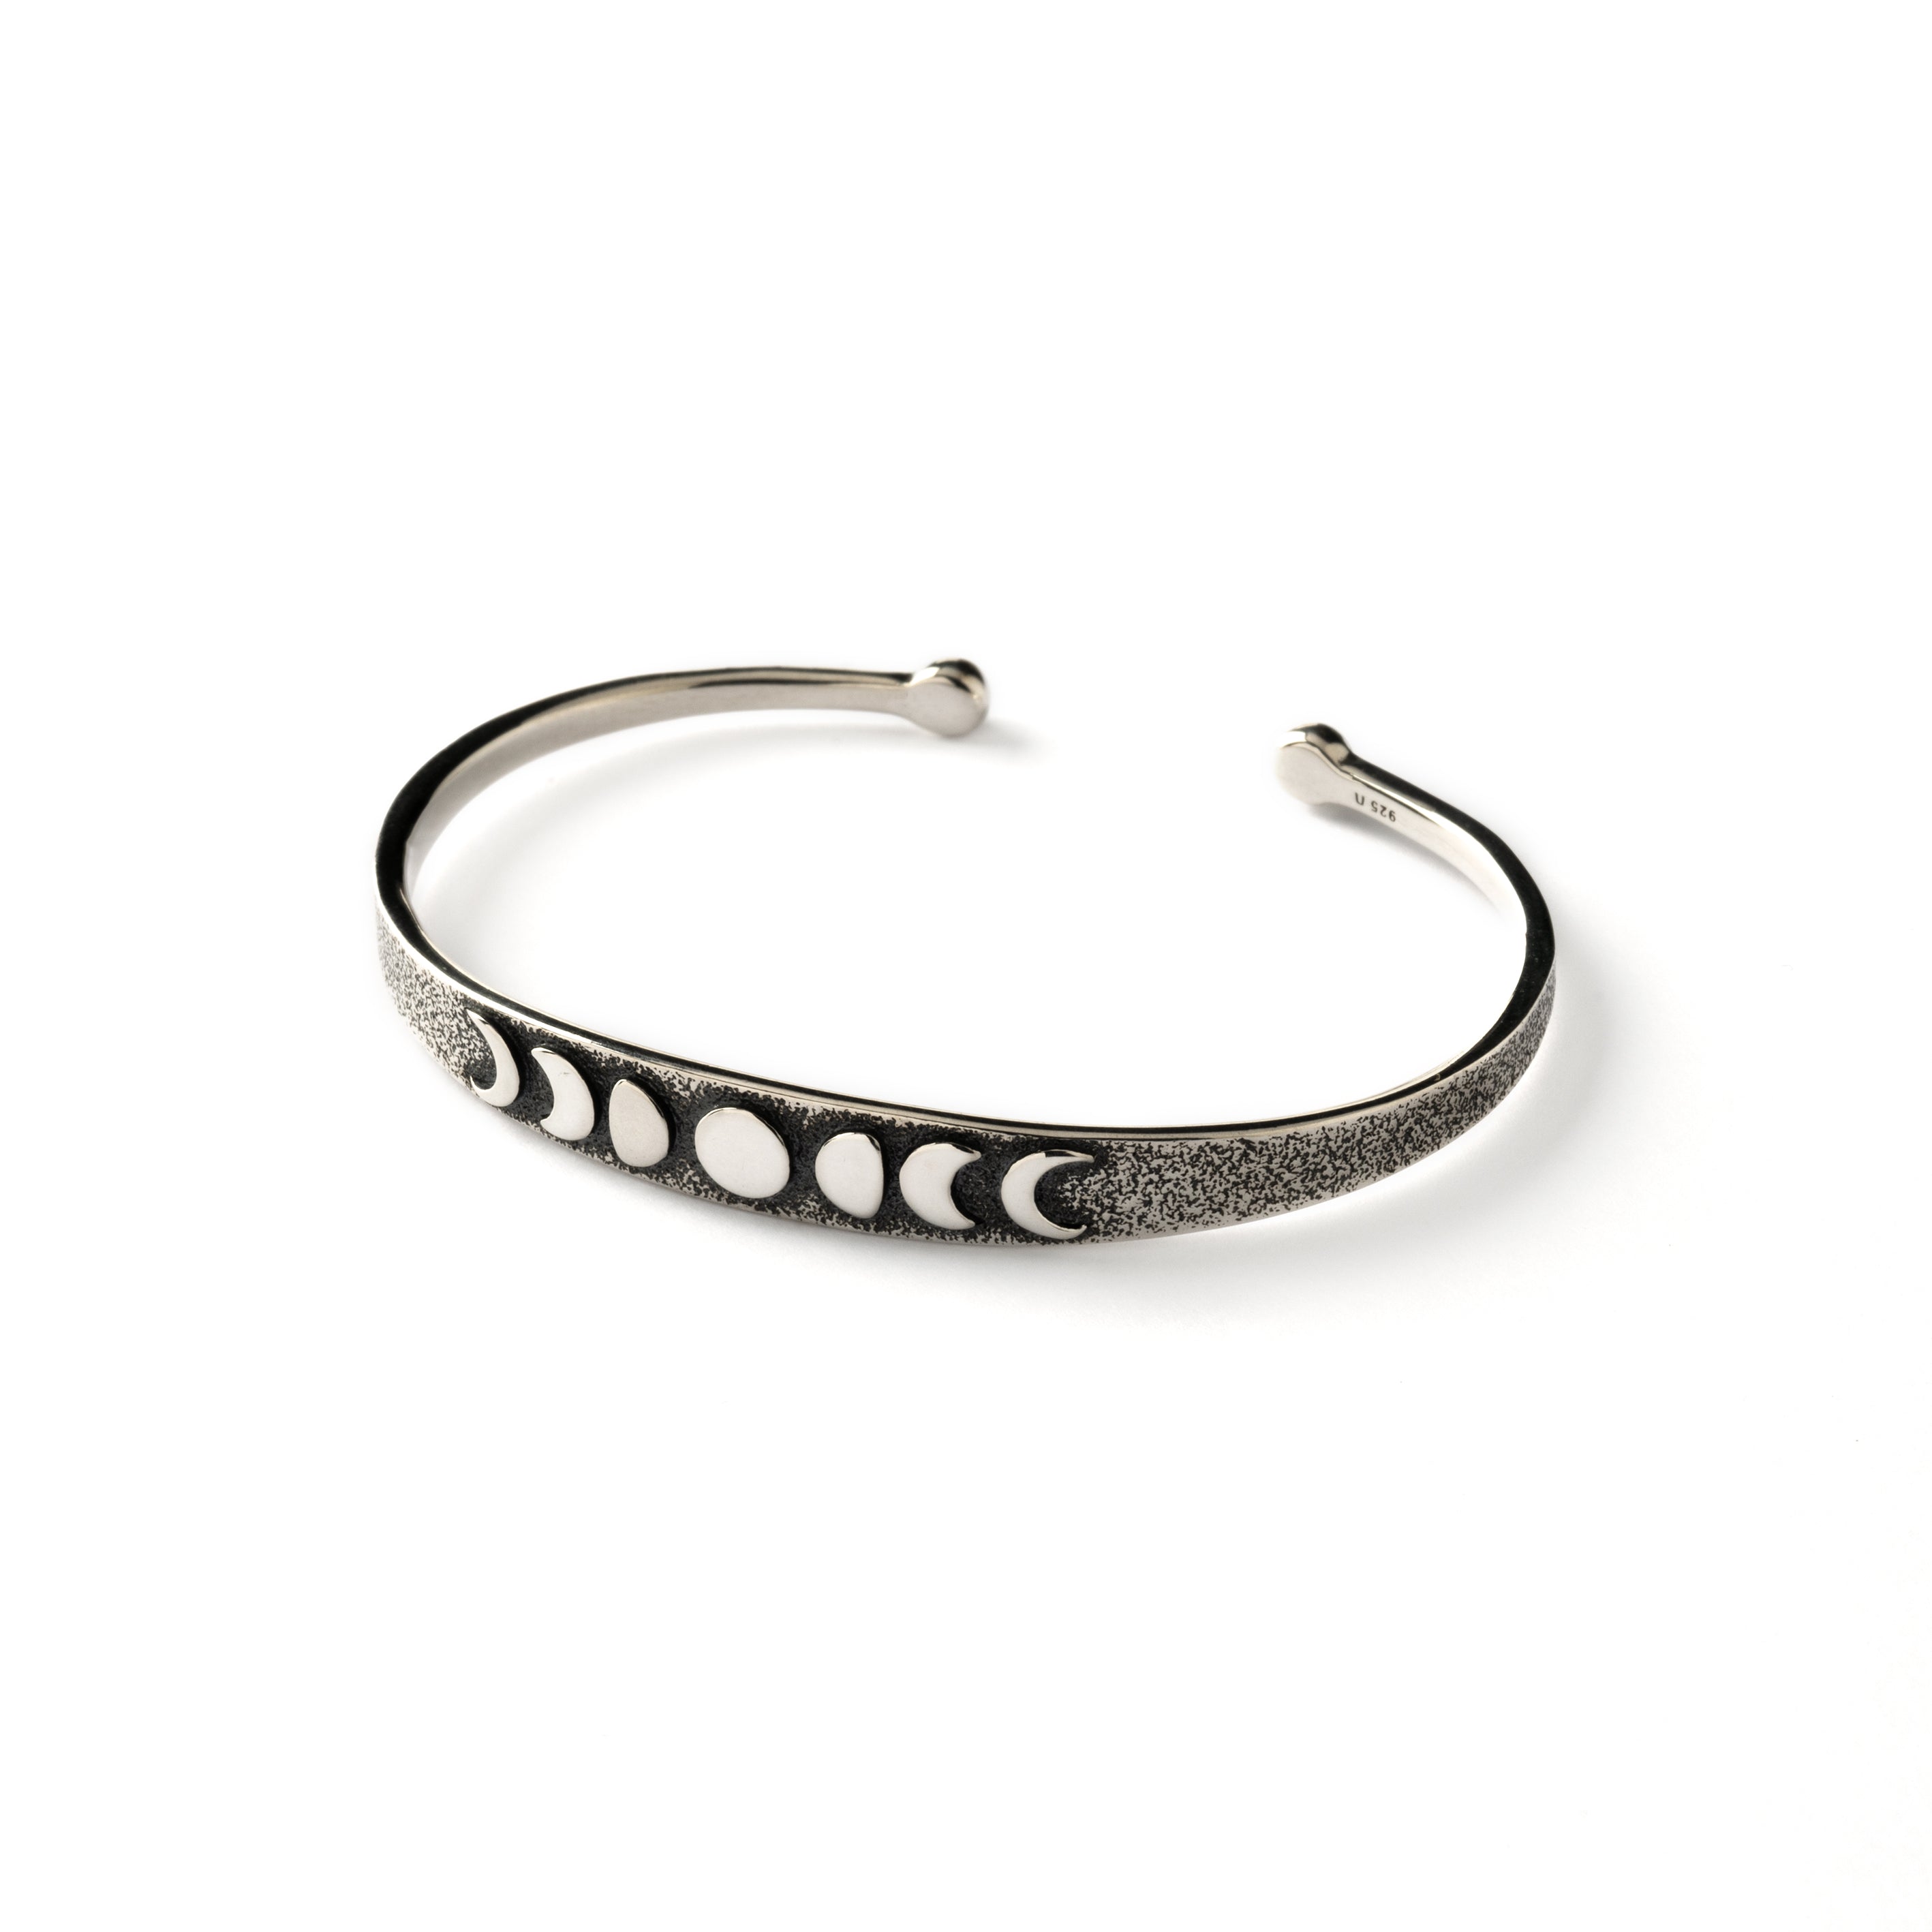 oxidised silver thin open bangle bracelet with embossed moon phases at the front